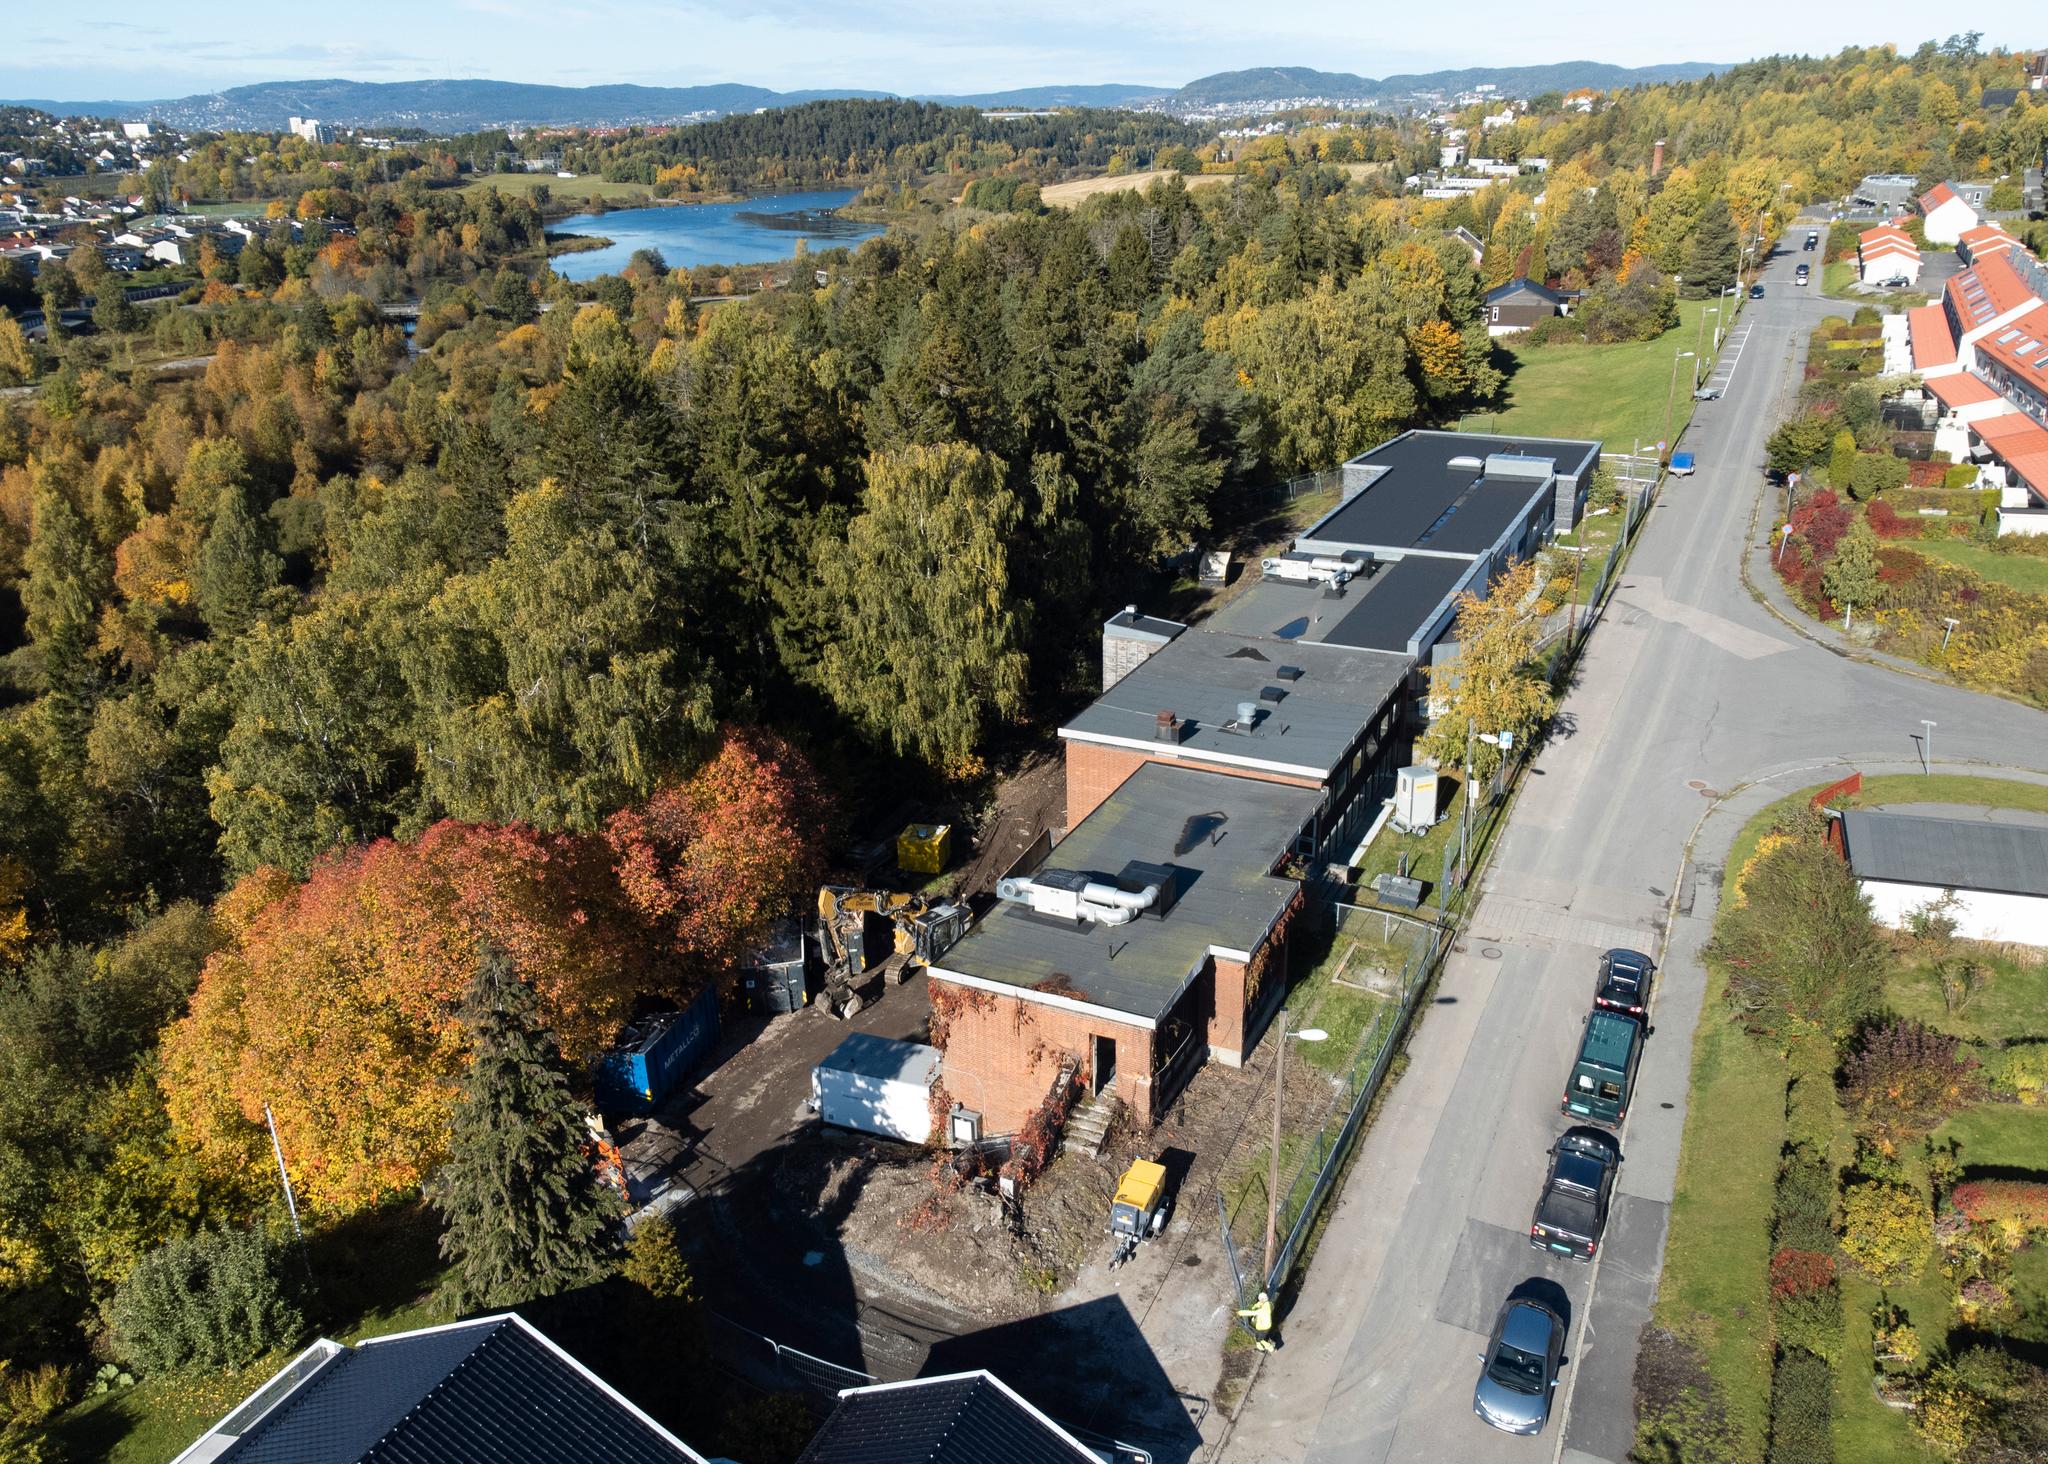 SV’s Push for Affordable Housing and Shared Ownership Initiatives in Norway